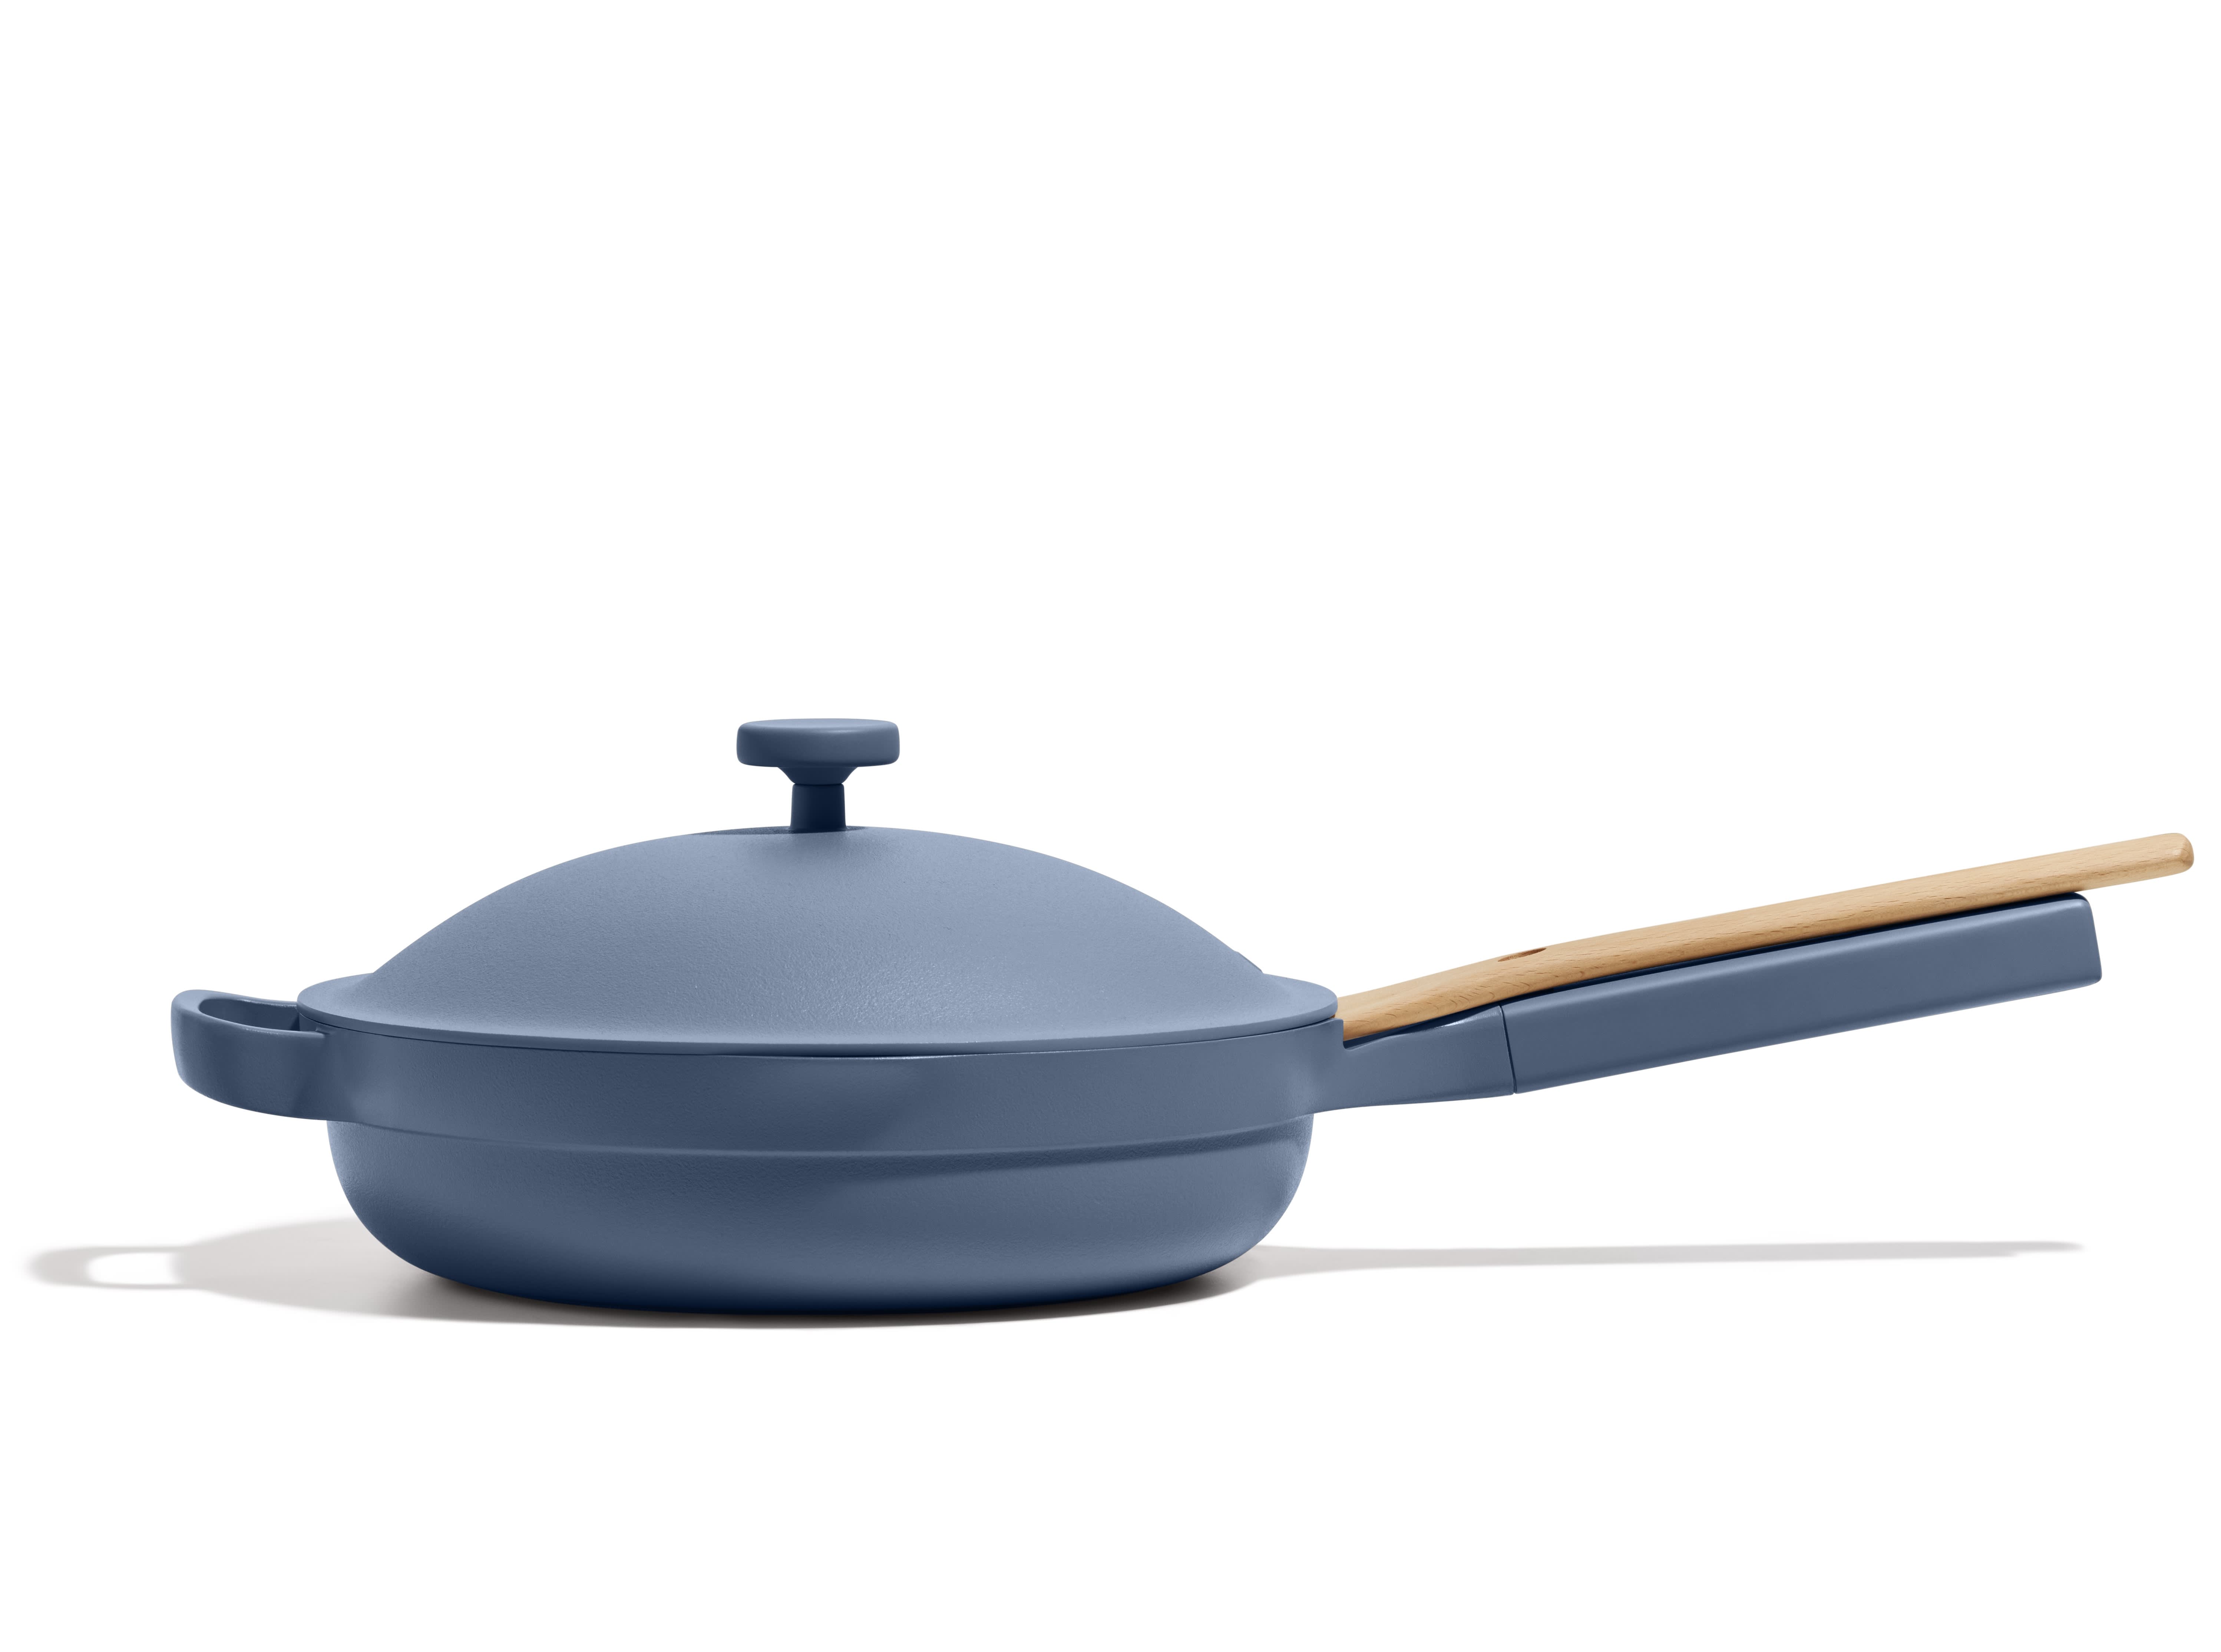 Staub reveals its new colourway for its premium cookware